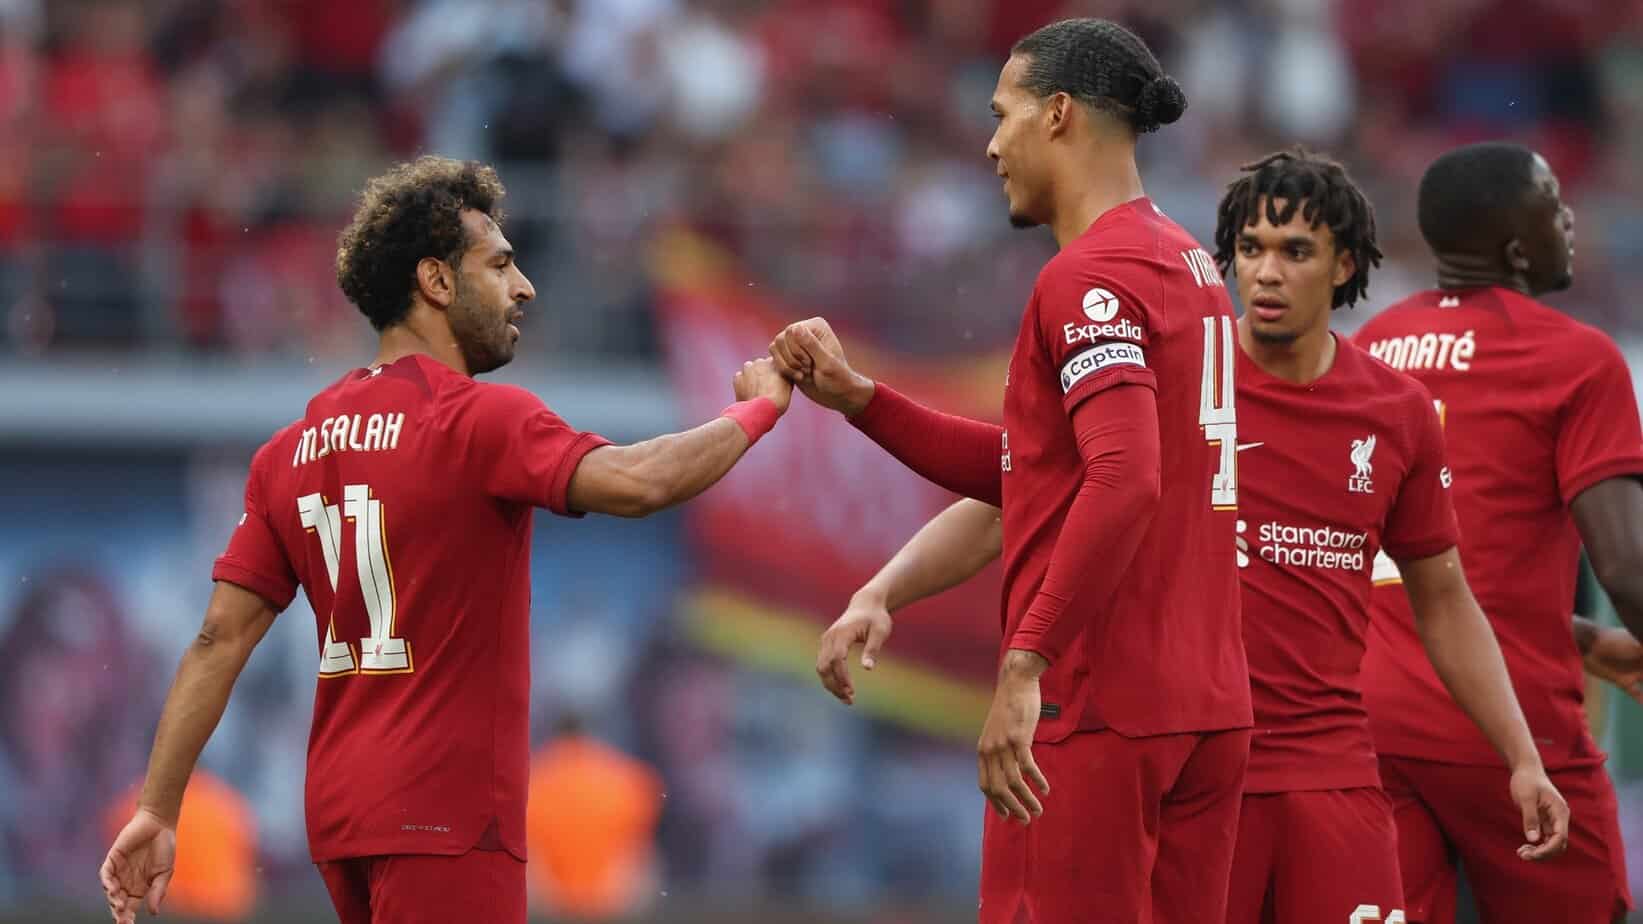 2022 FA Community Shield: Liverpool vs. Manchester City – Preview and Betting Odds